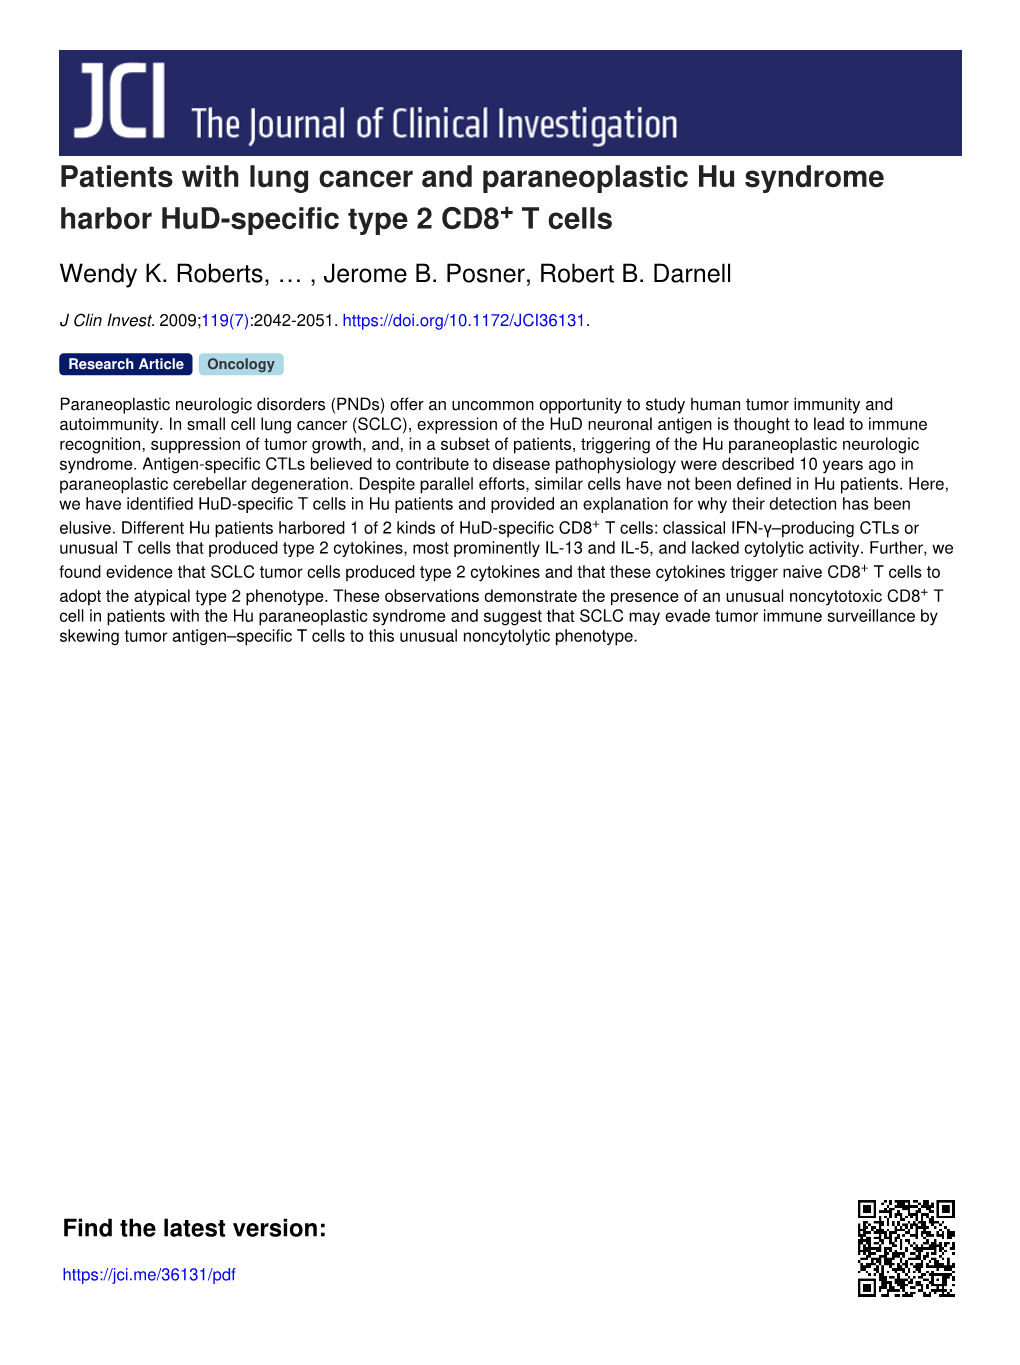 Patients with Lung Cancer and Paraneoplastic Hu Syndrome Harbor Hud-Specific Type 2 CD8+ T Cells